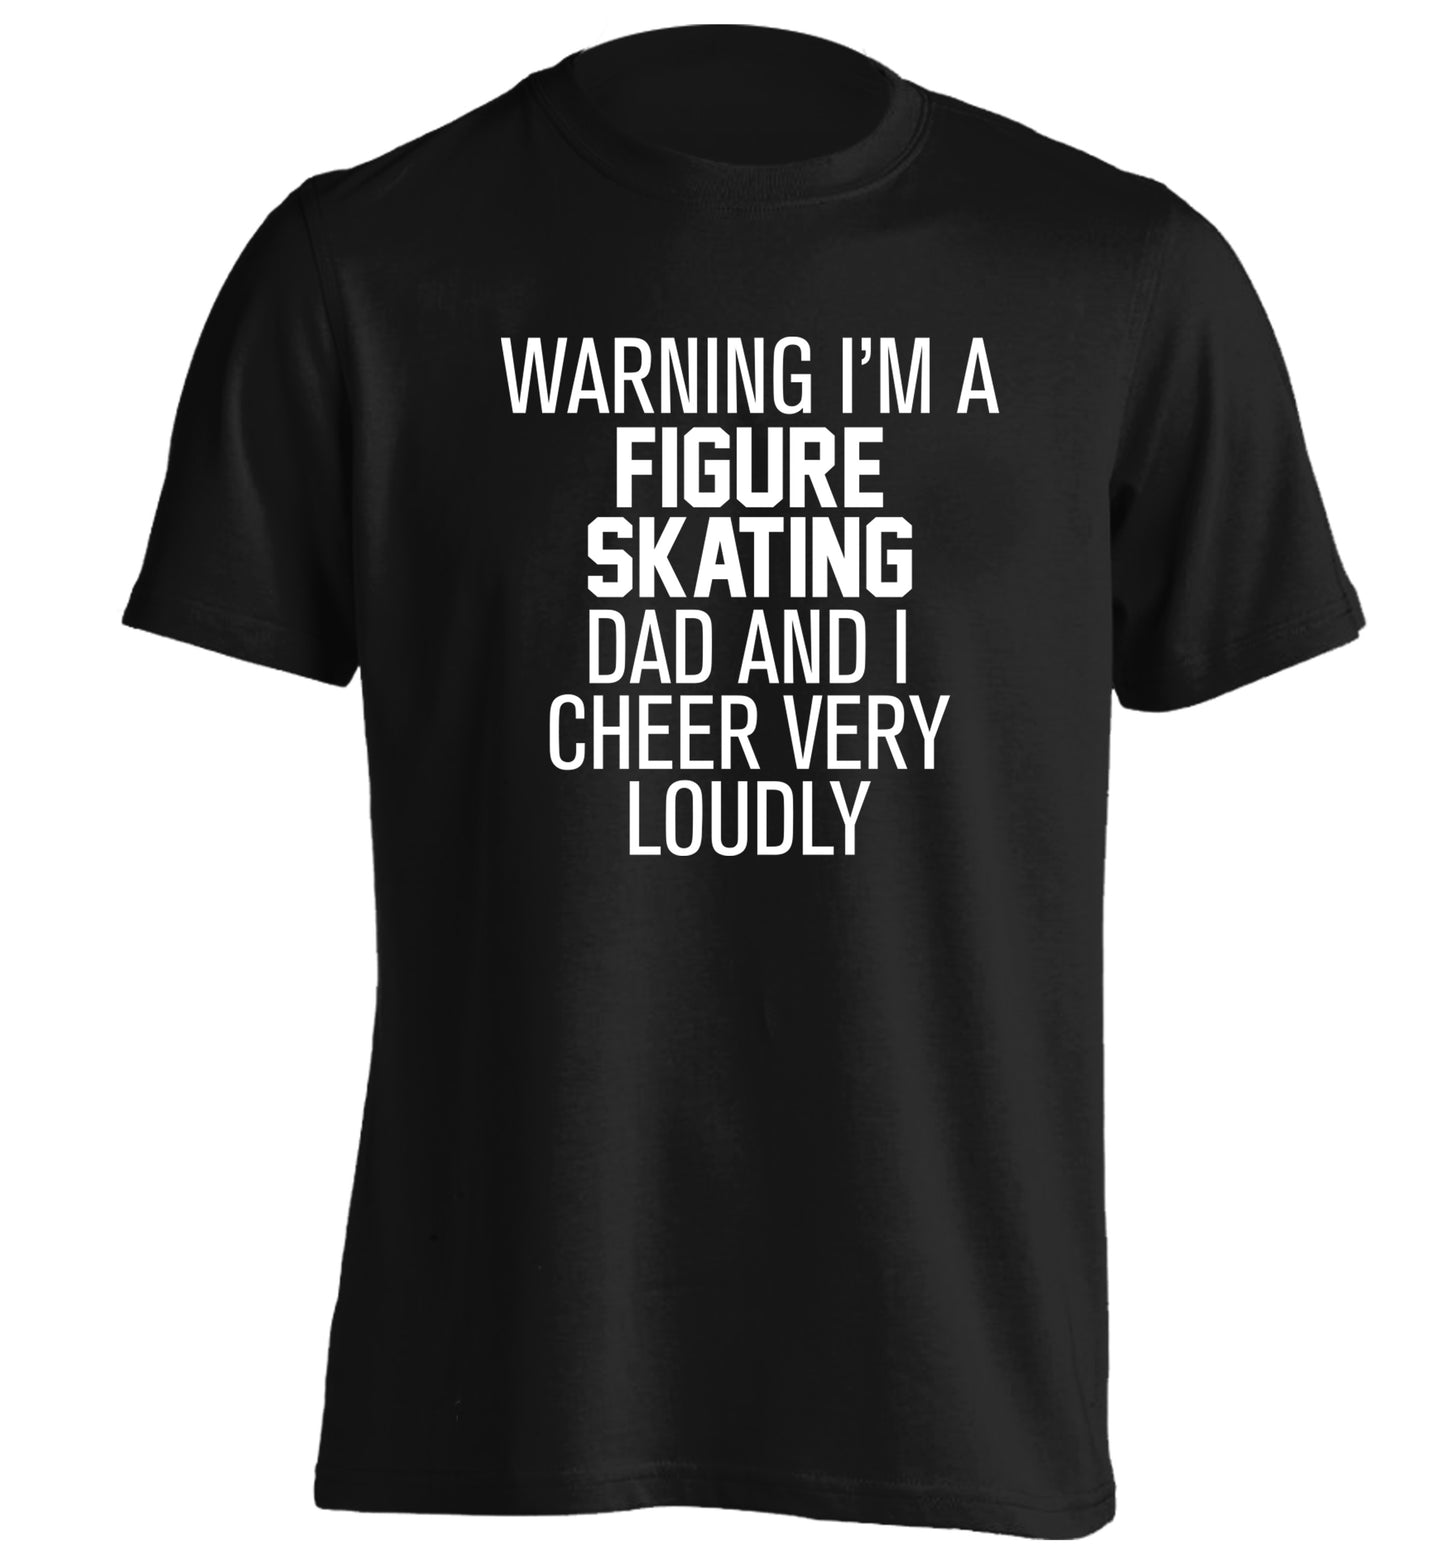 Warning I'm a figure skating dad and I cheer very loudly adults unisexblack Tshirt 2XL